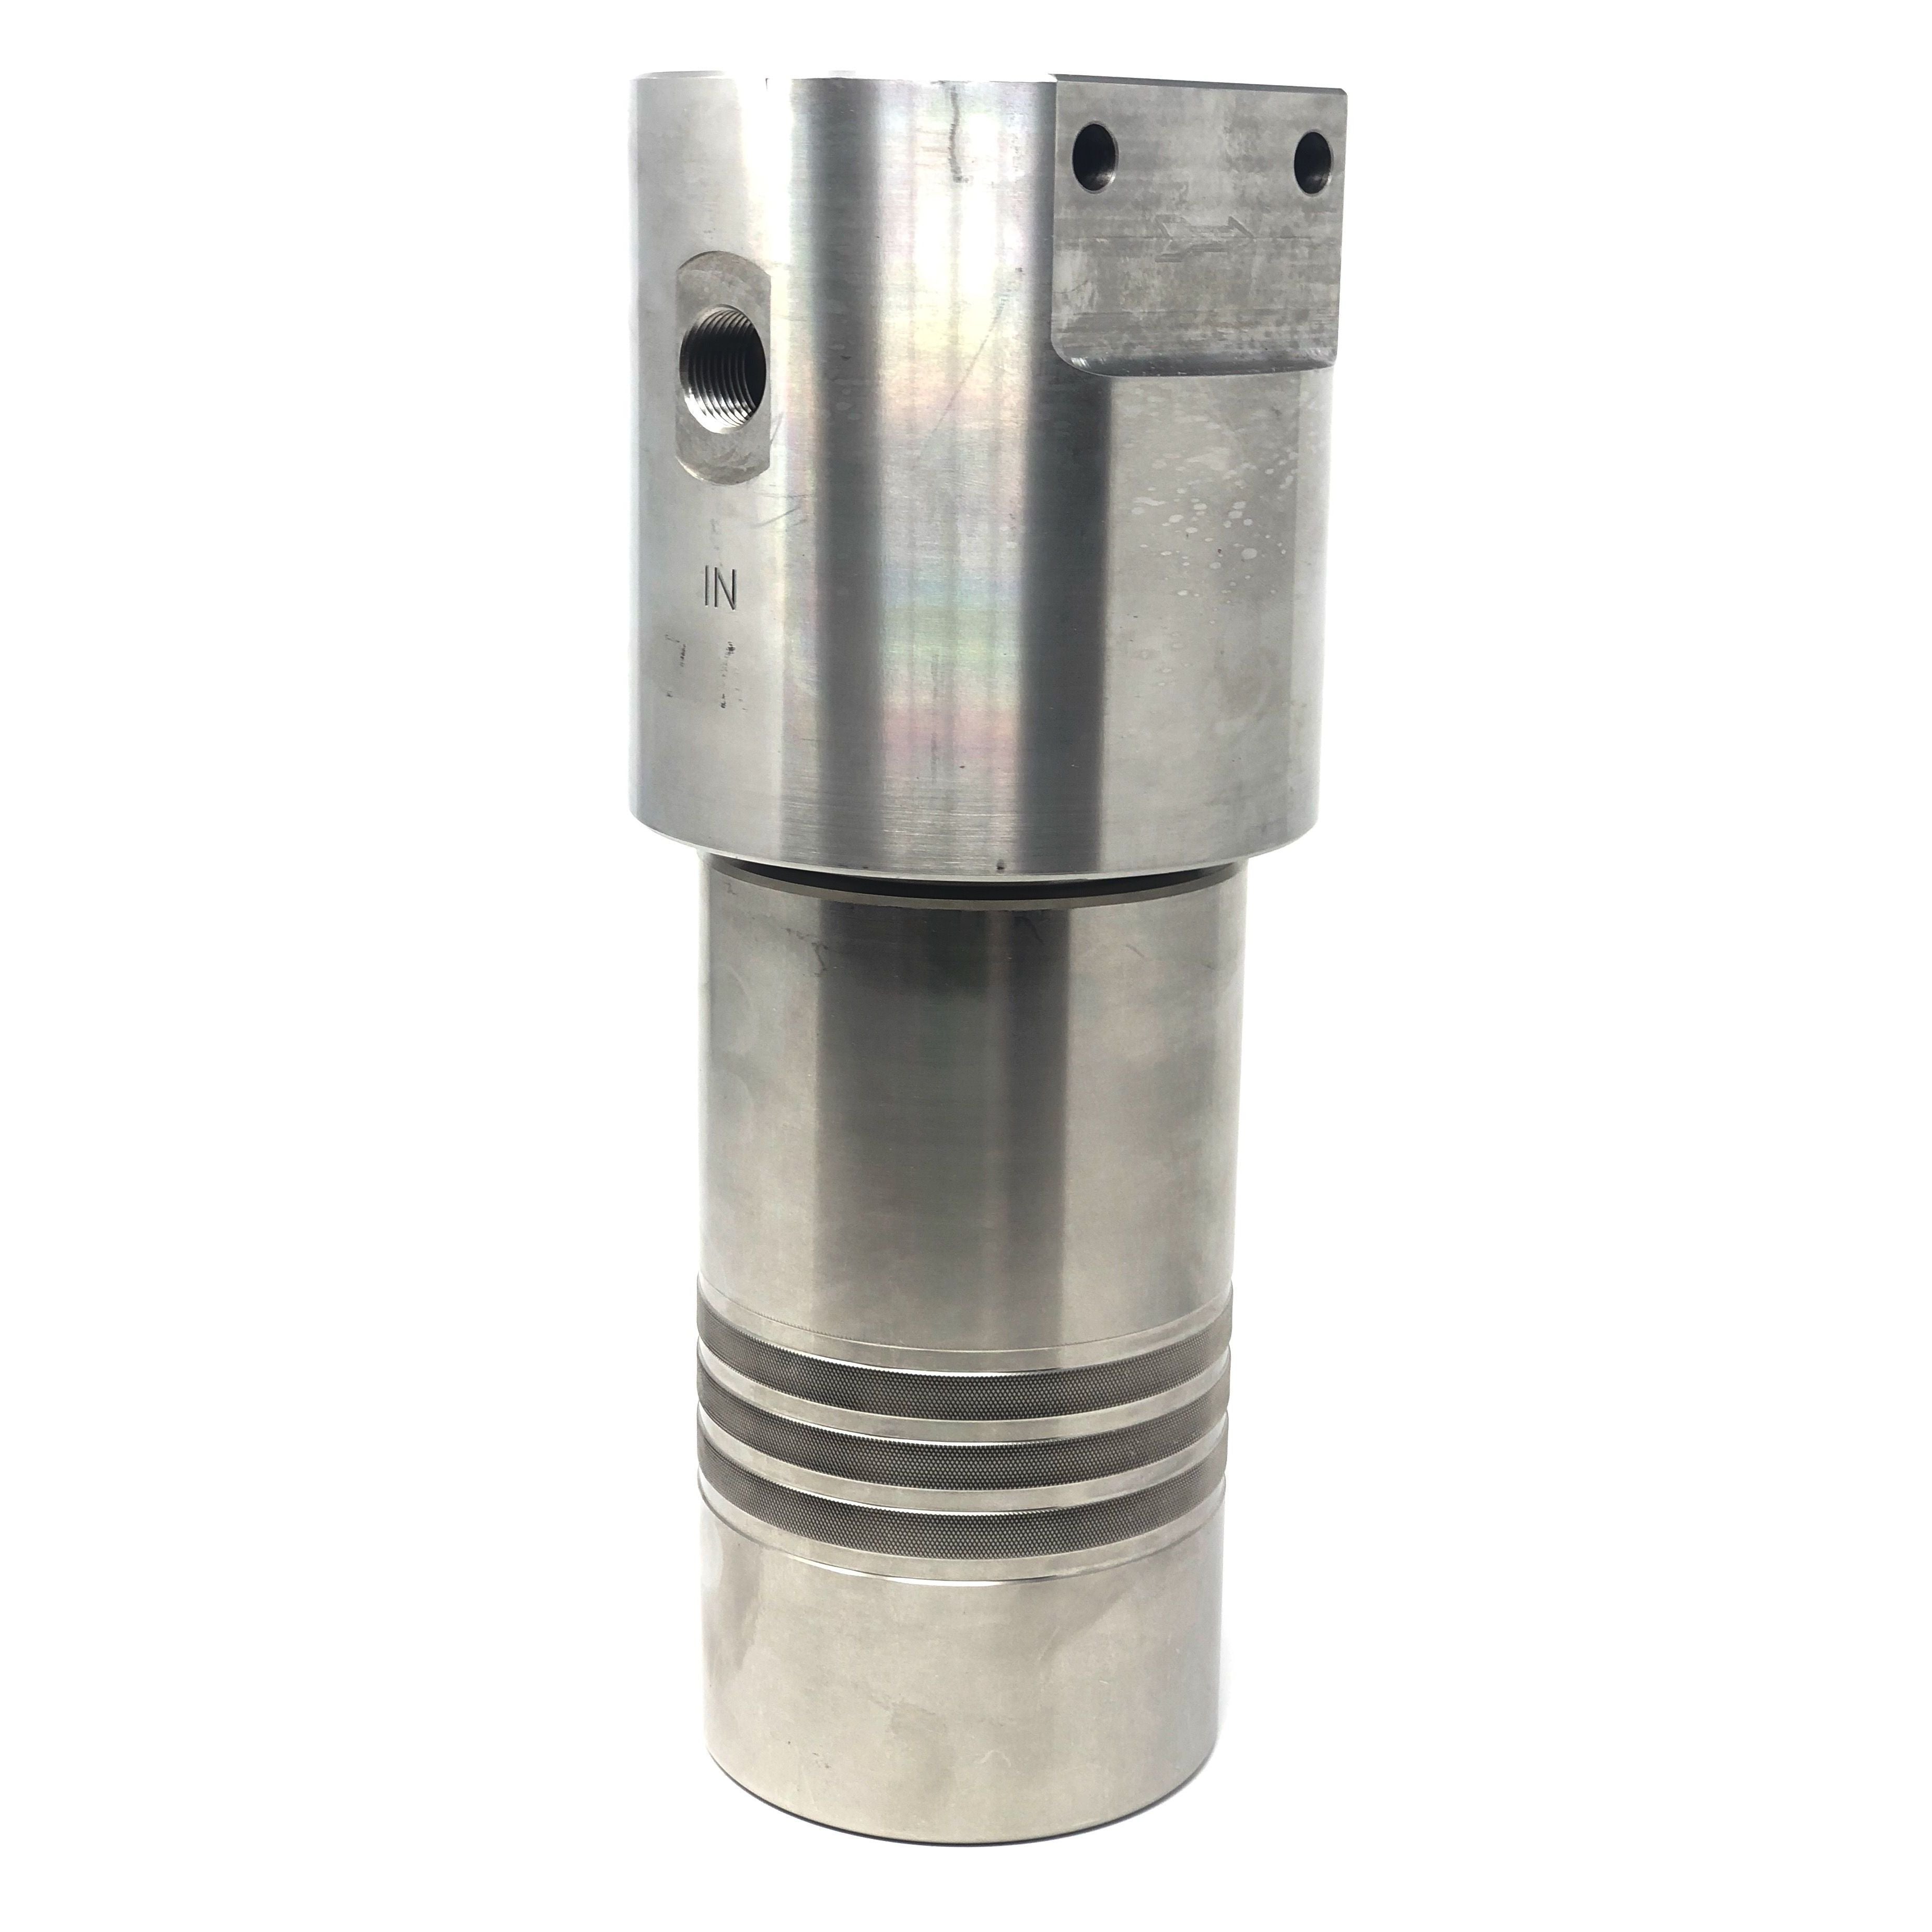 52S-244N-100SEN : Chase Ultra High Pressure Inline Filter, 10000psi, 1/4" NPT, 100 Micron, With Visual Indicator, No Bypass